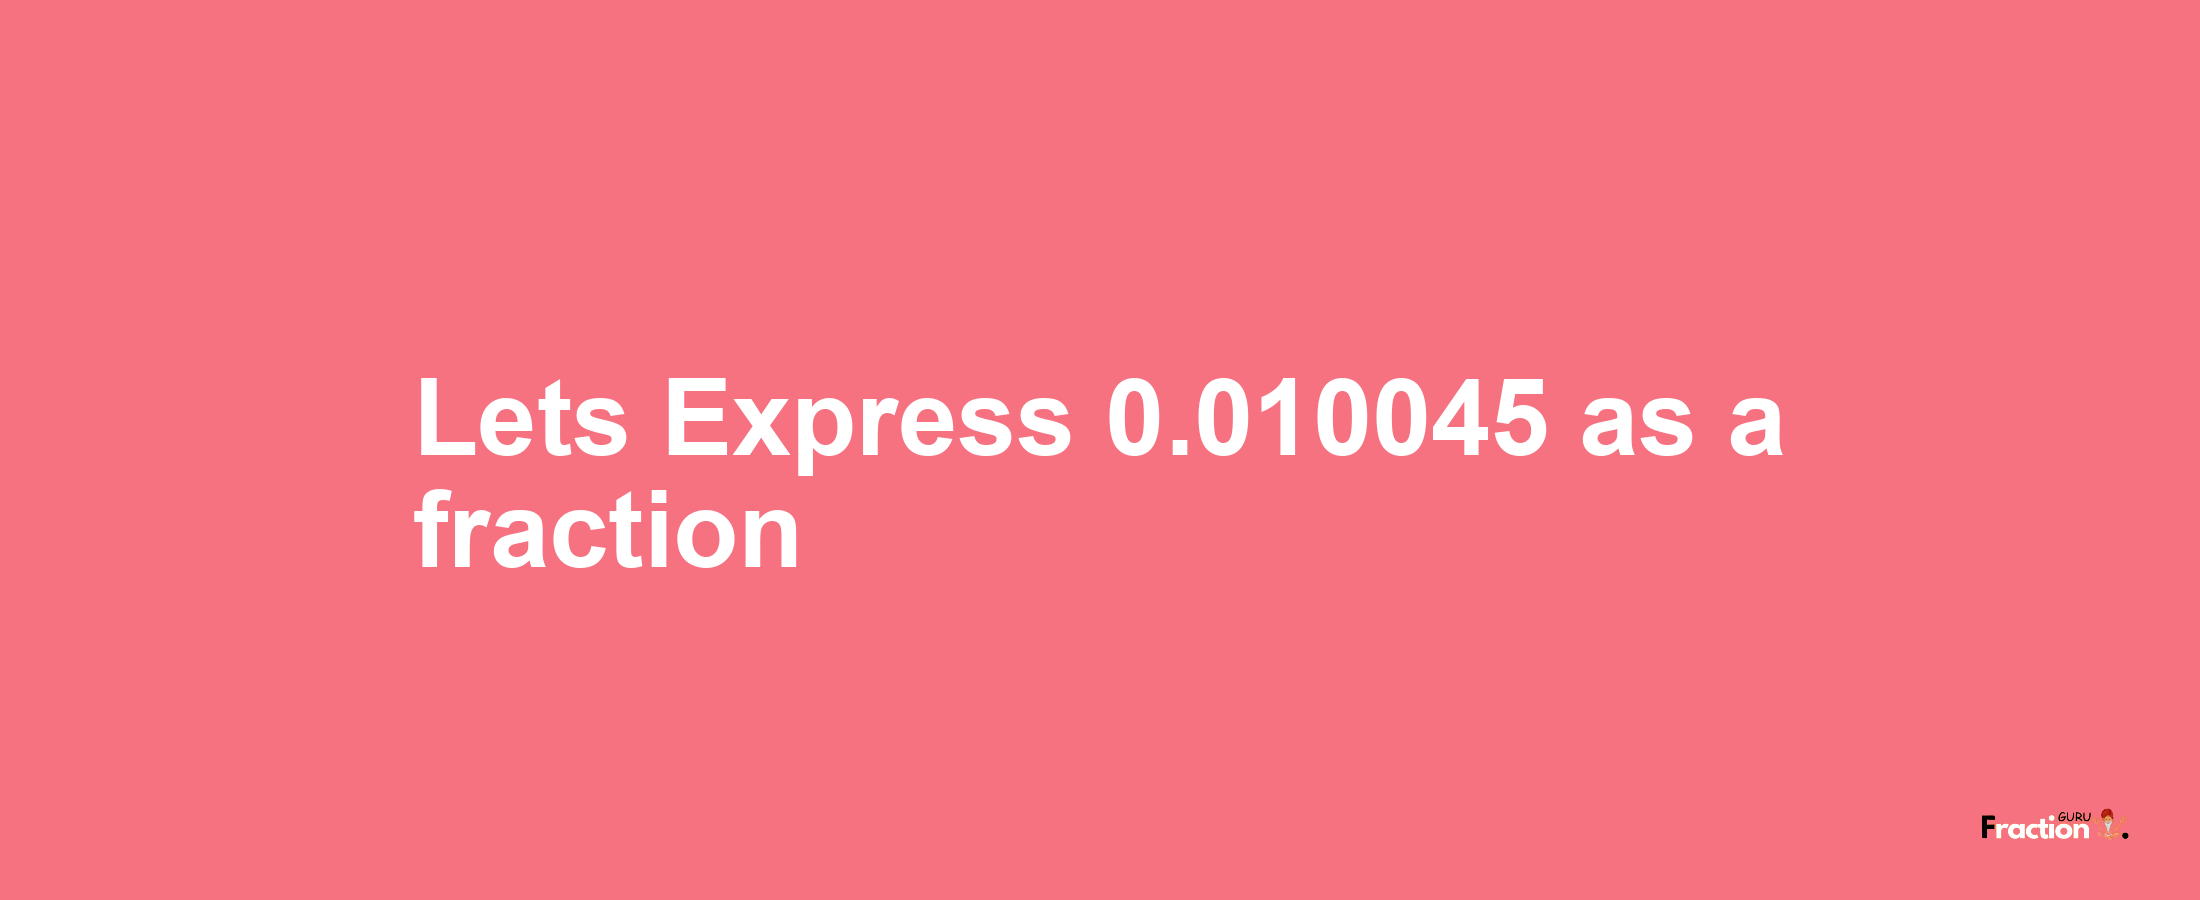 Lets Express 0.010045 as afraction